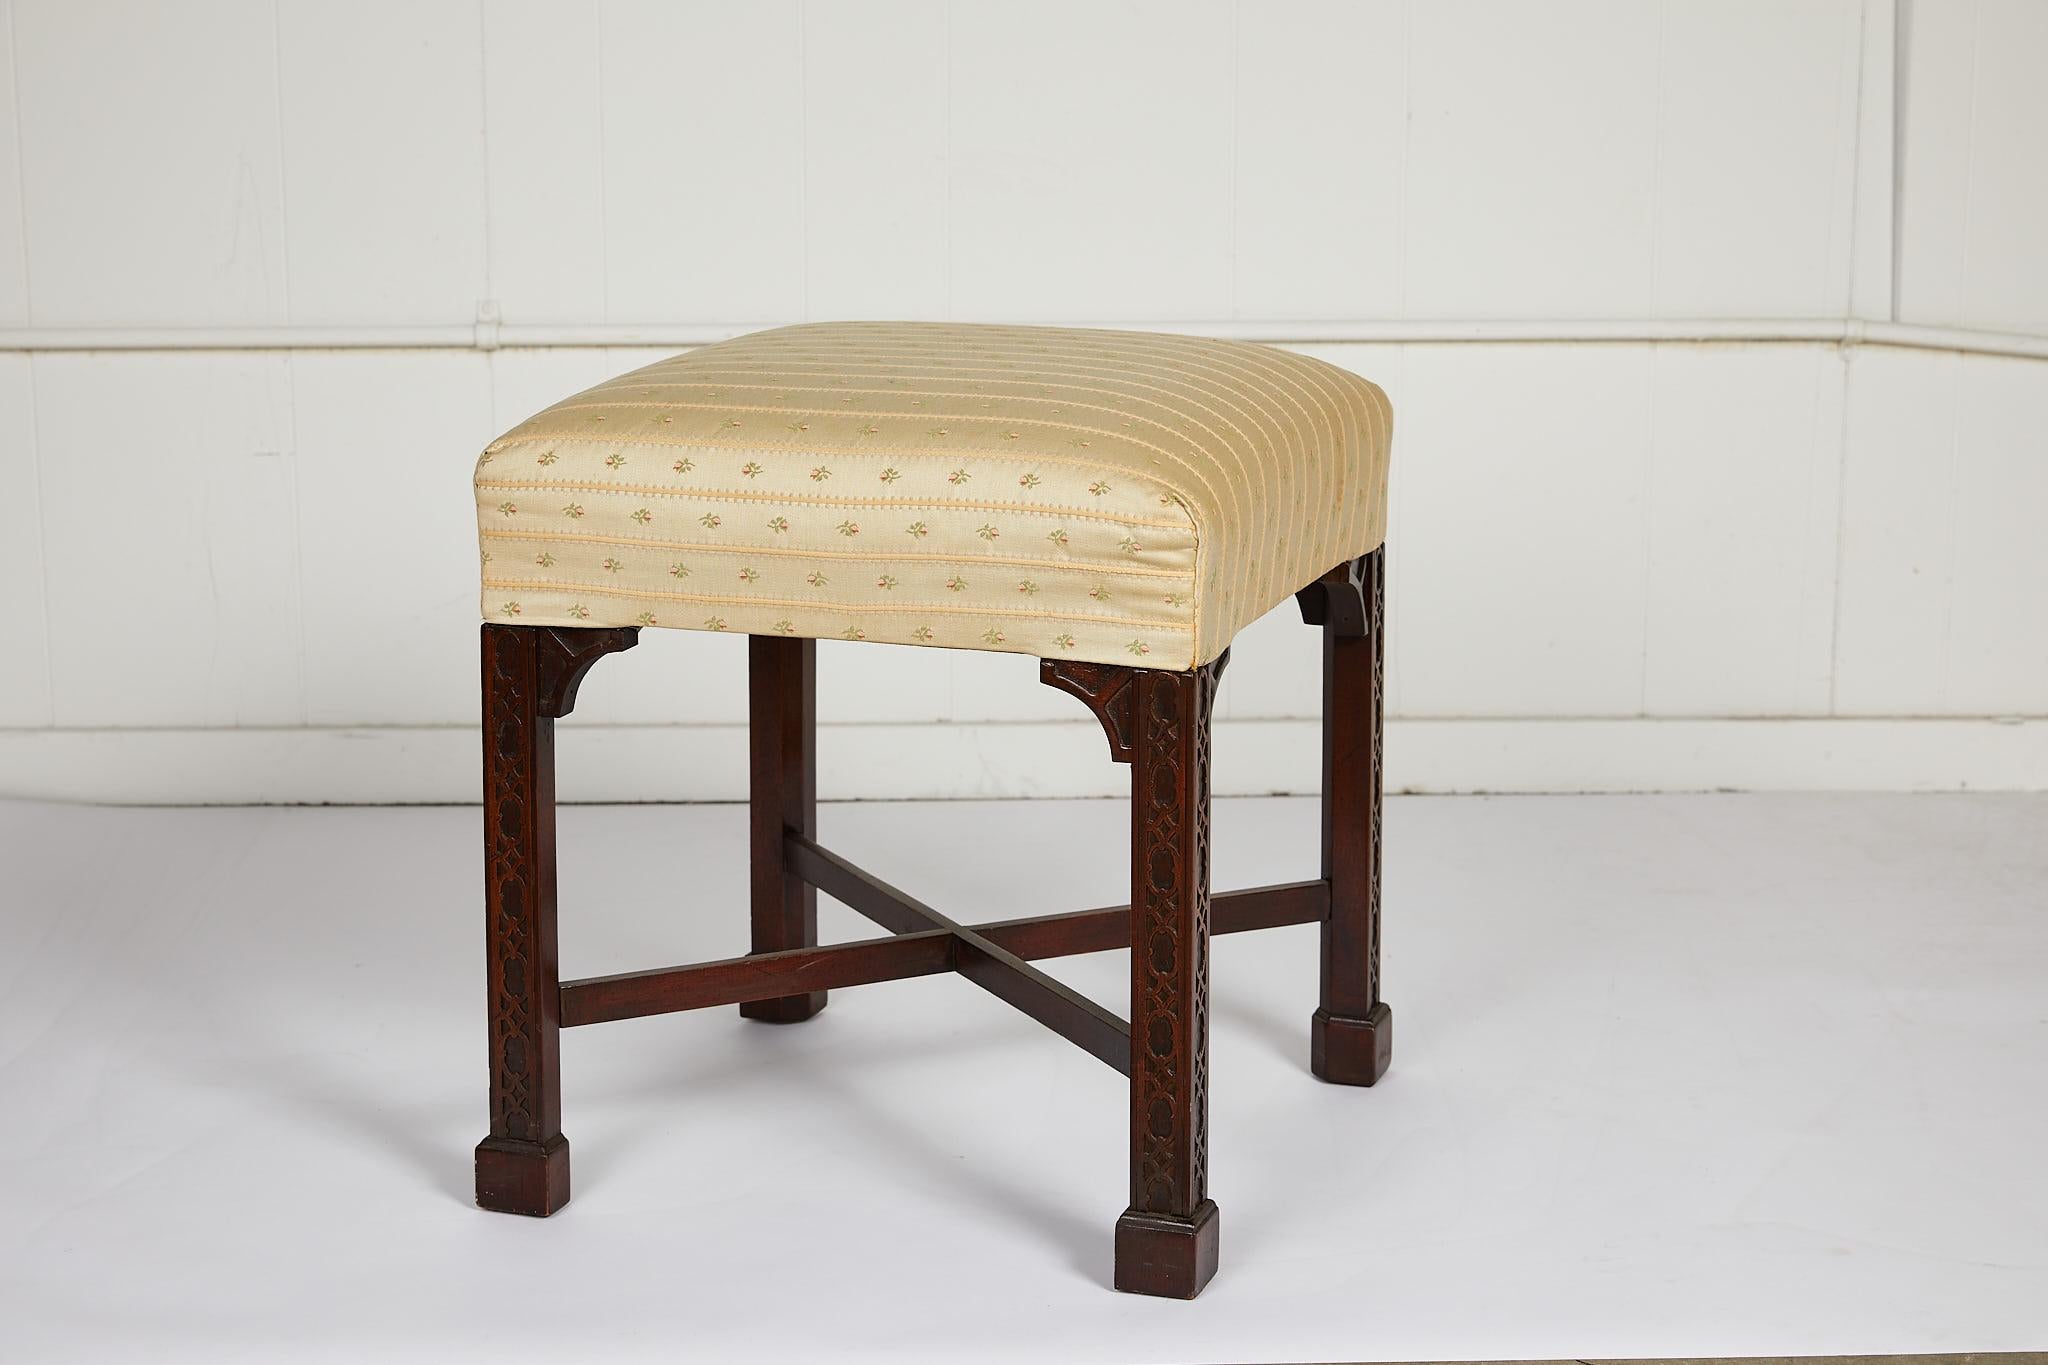 Charming 19th century English carved mahogany stool in the Chinese Chippendale style with four square fretwork carved legs and block feet joined by an X stretcher. The stool is upholstered in a delicate miniature floral and stripe, and the fabric is